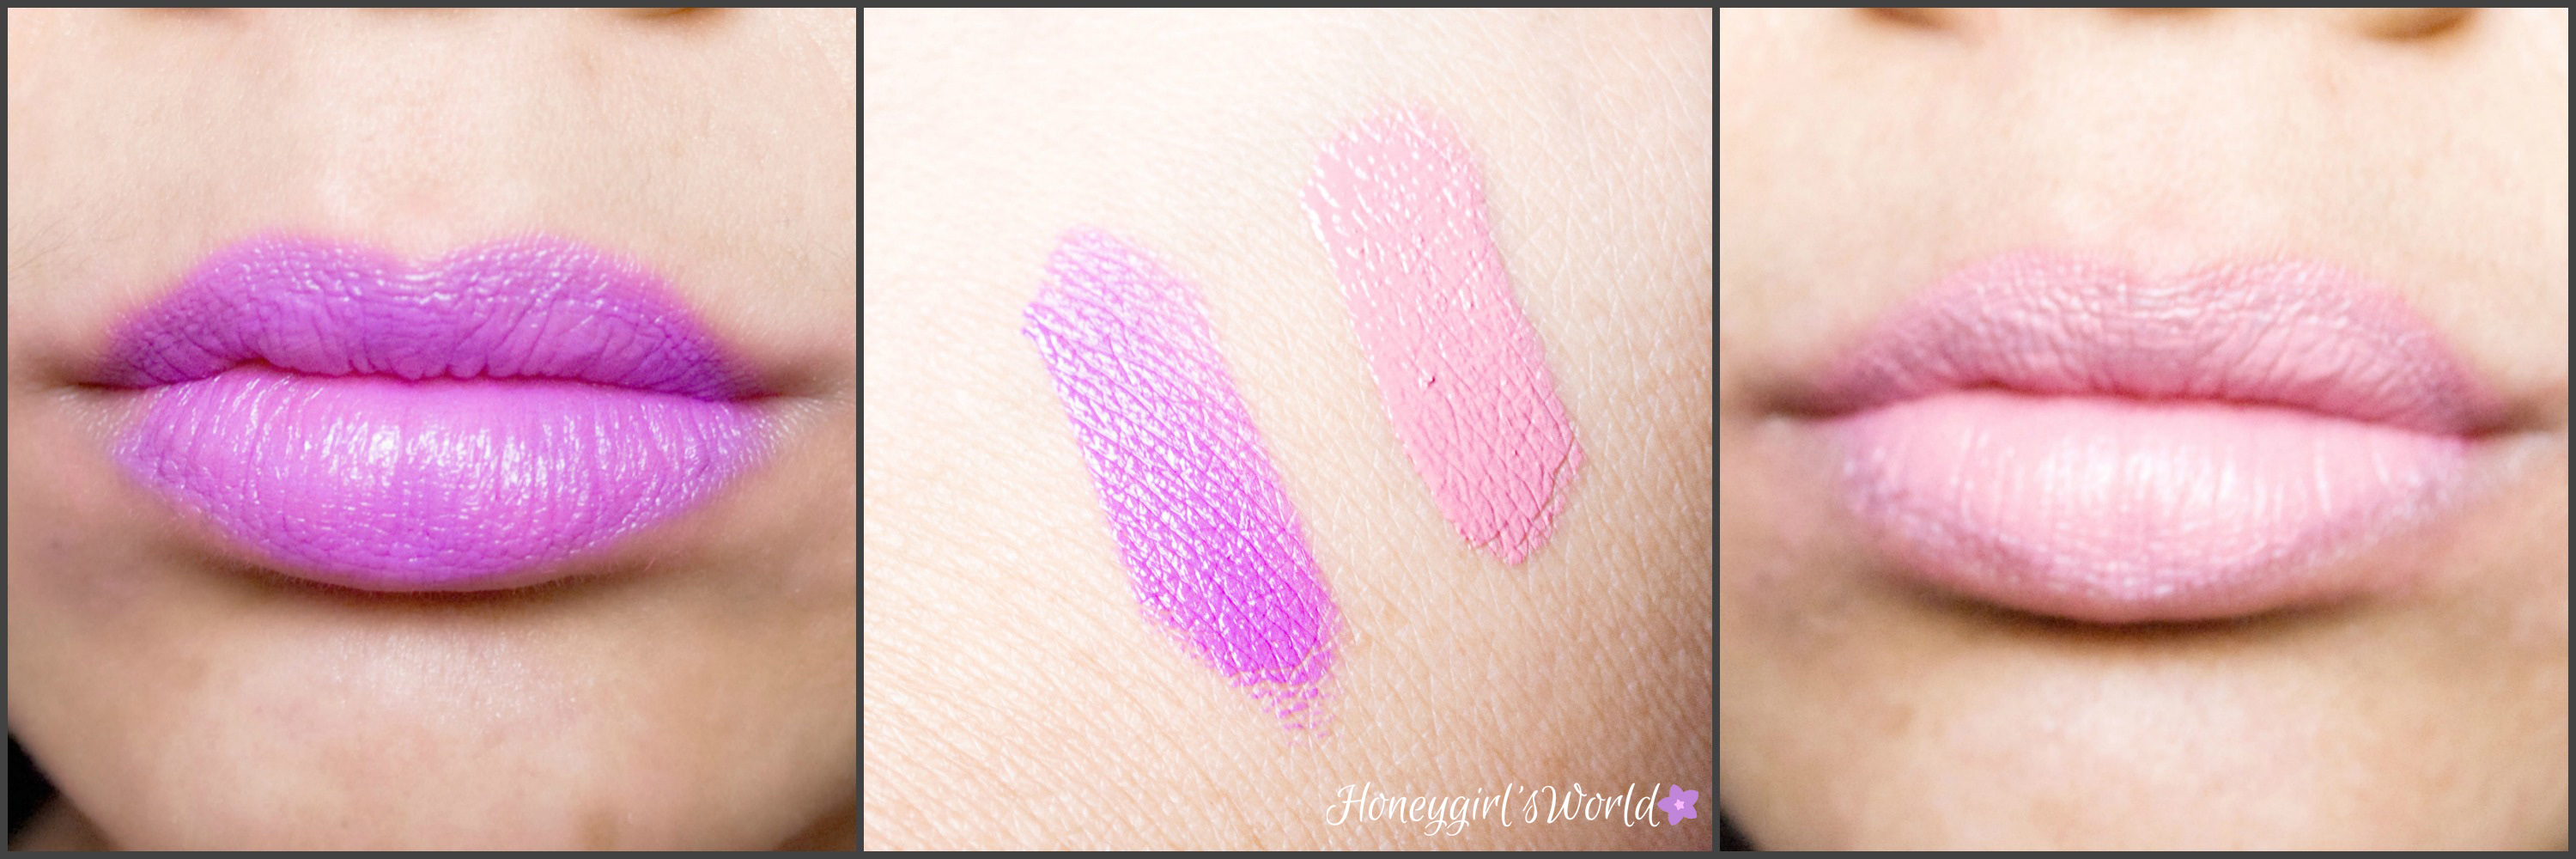 Too Faced Melted Lipsticks